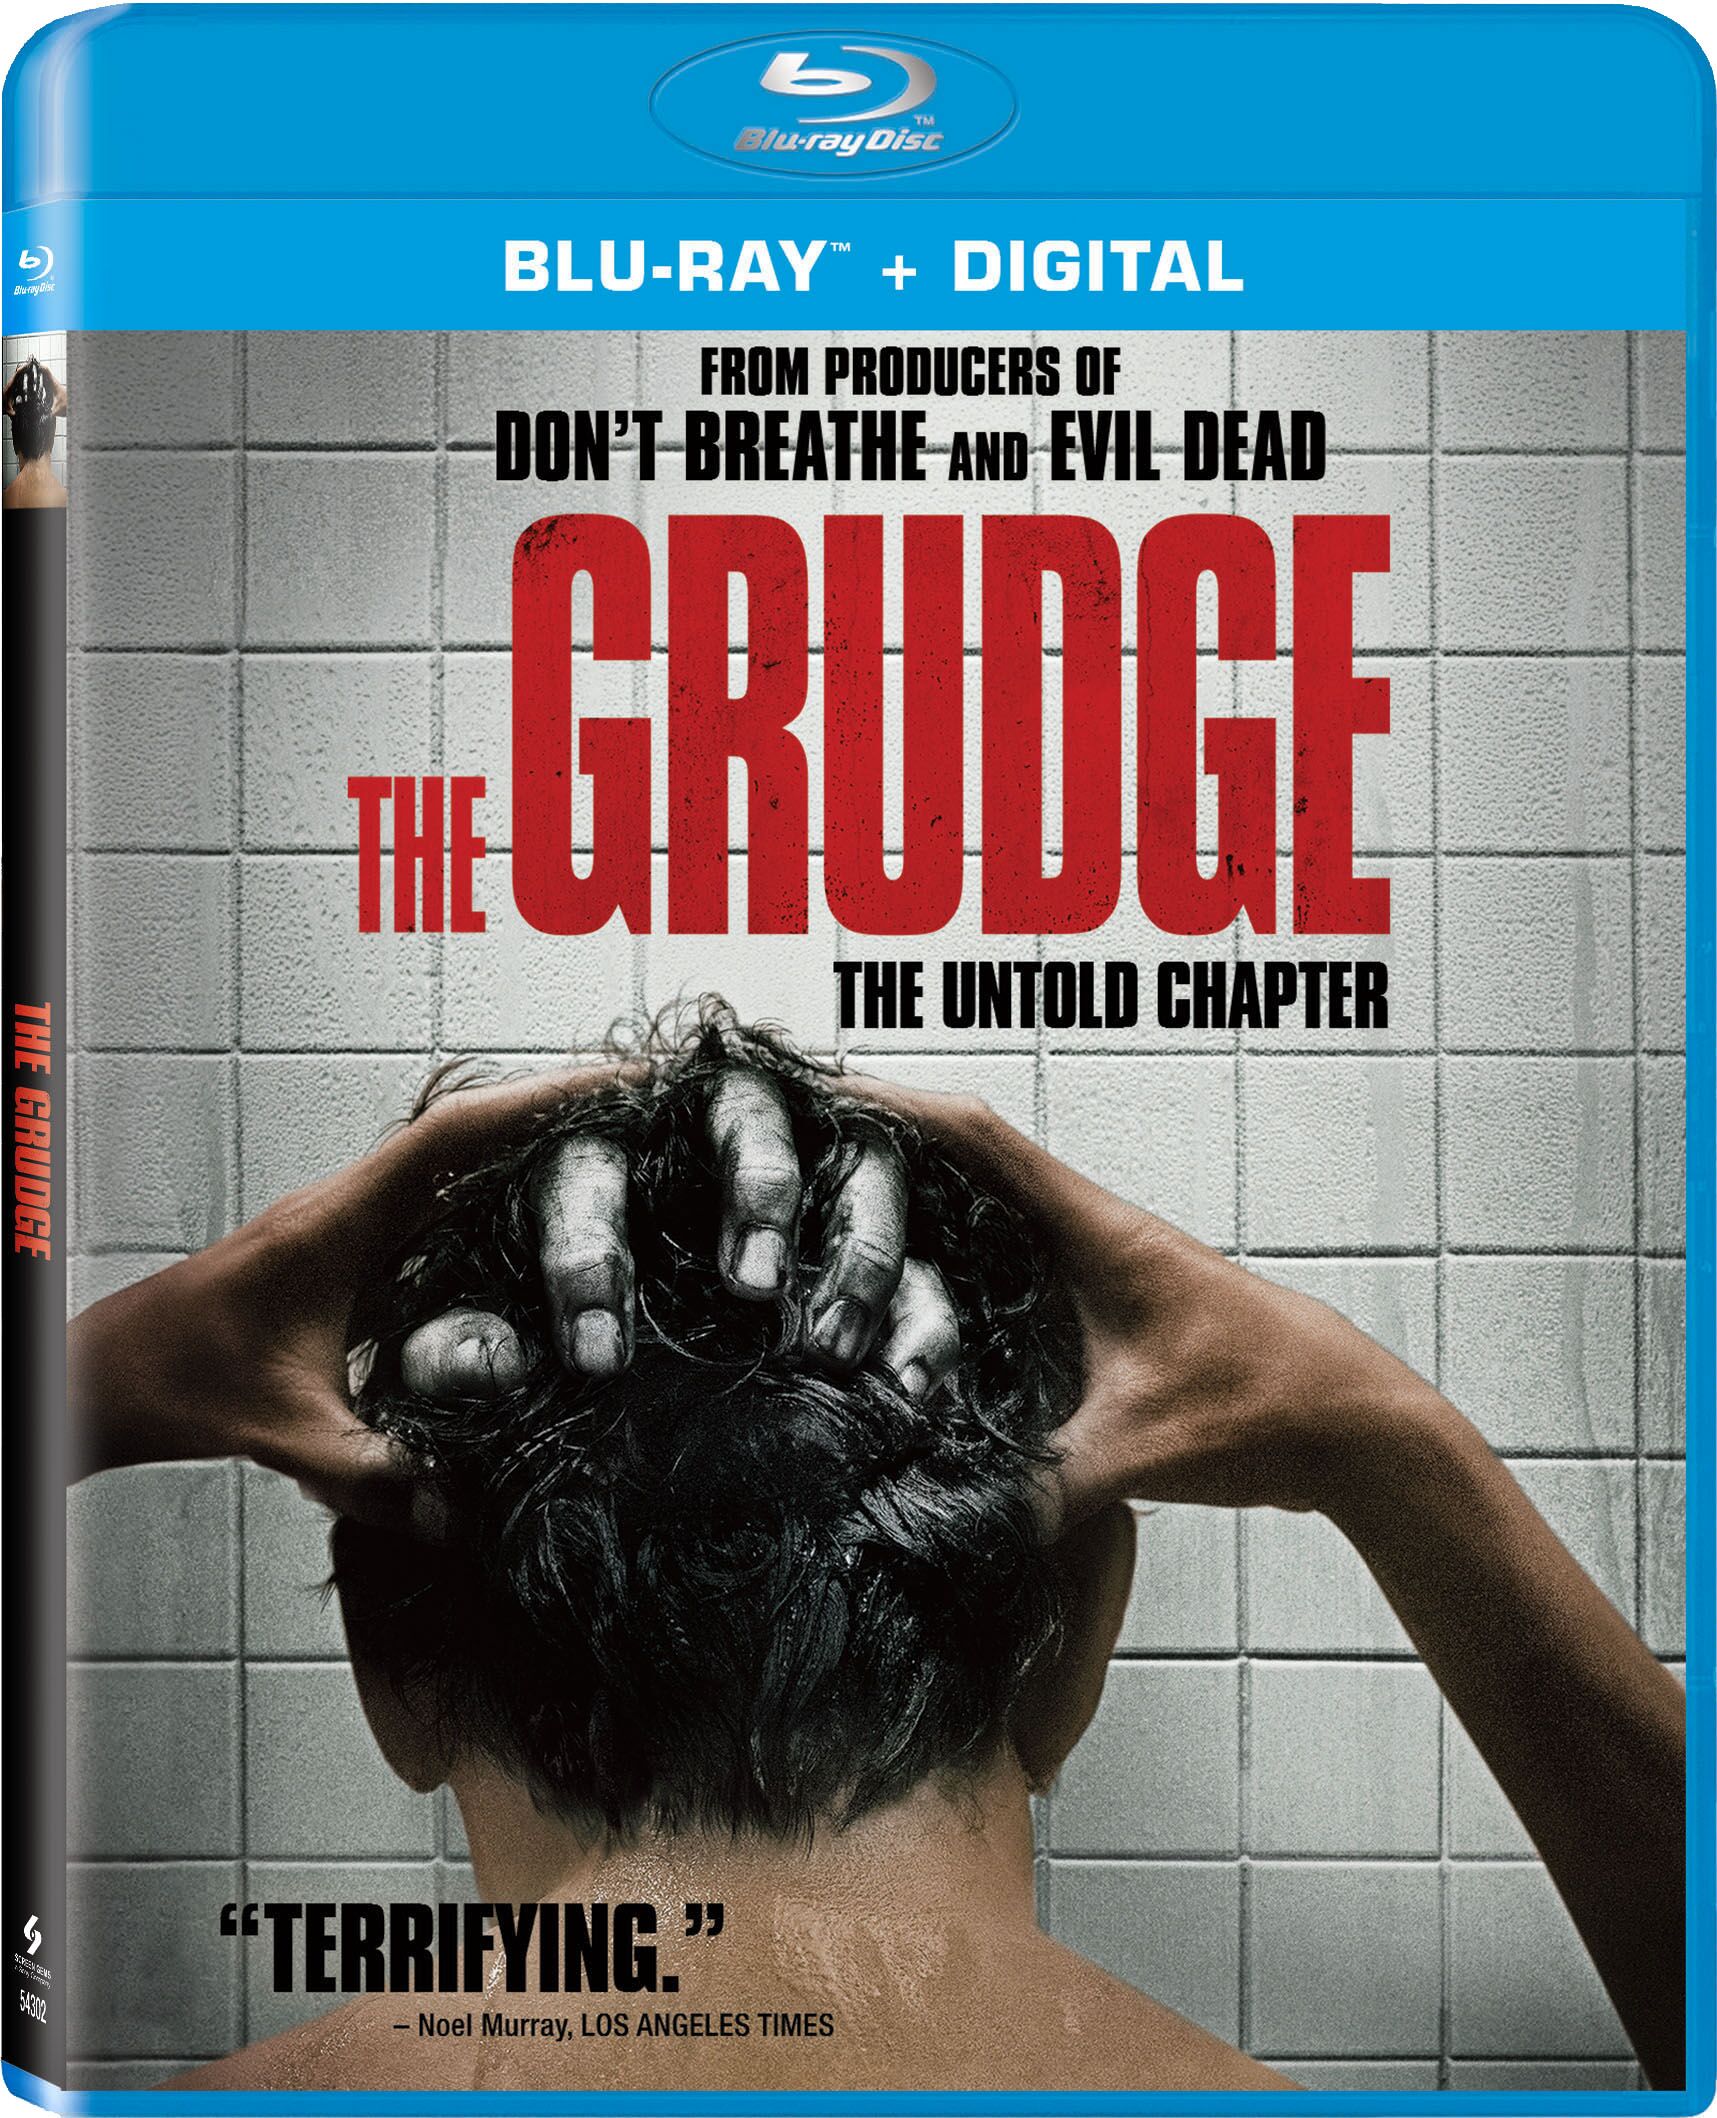 [News] Go Behind-The-Scenes of Nicolas Pesce's THE GRUDGE